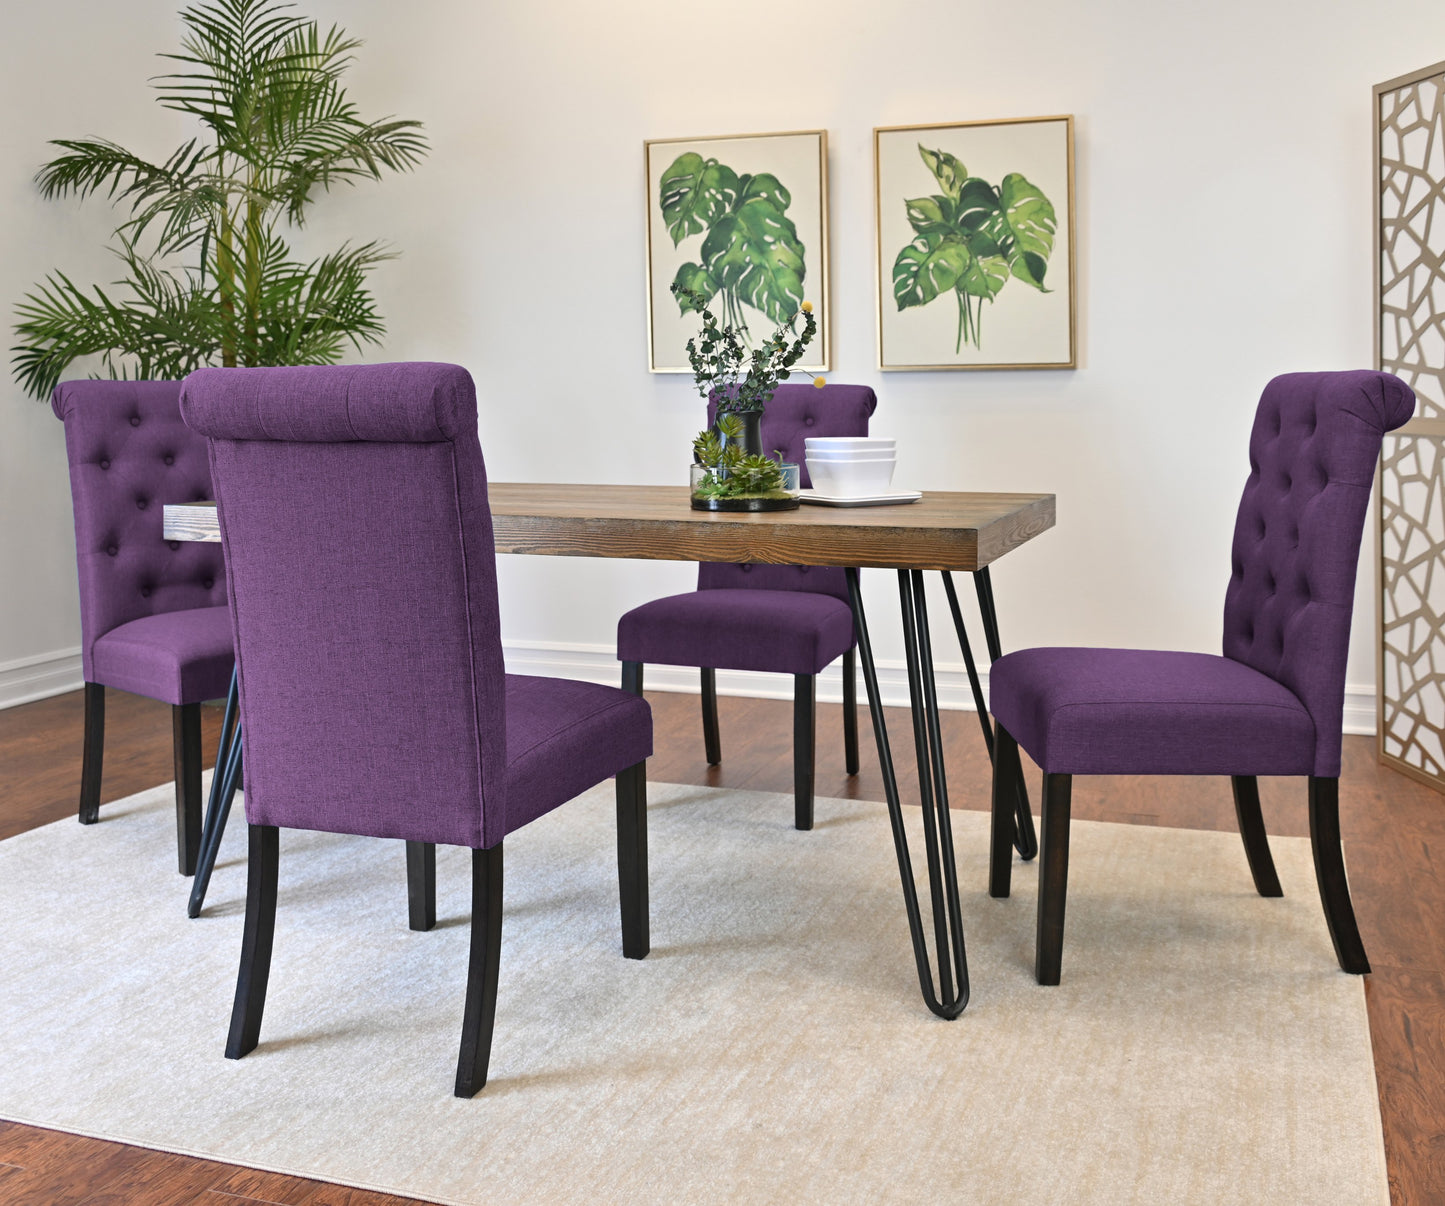 Ashford 6-Piece Dining Set, Hairpin Dining Table with 4 Chairs and Bench, 4 Color Options